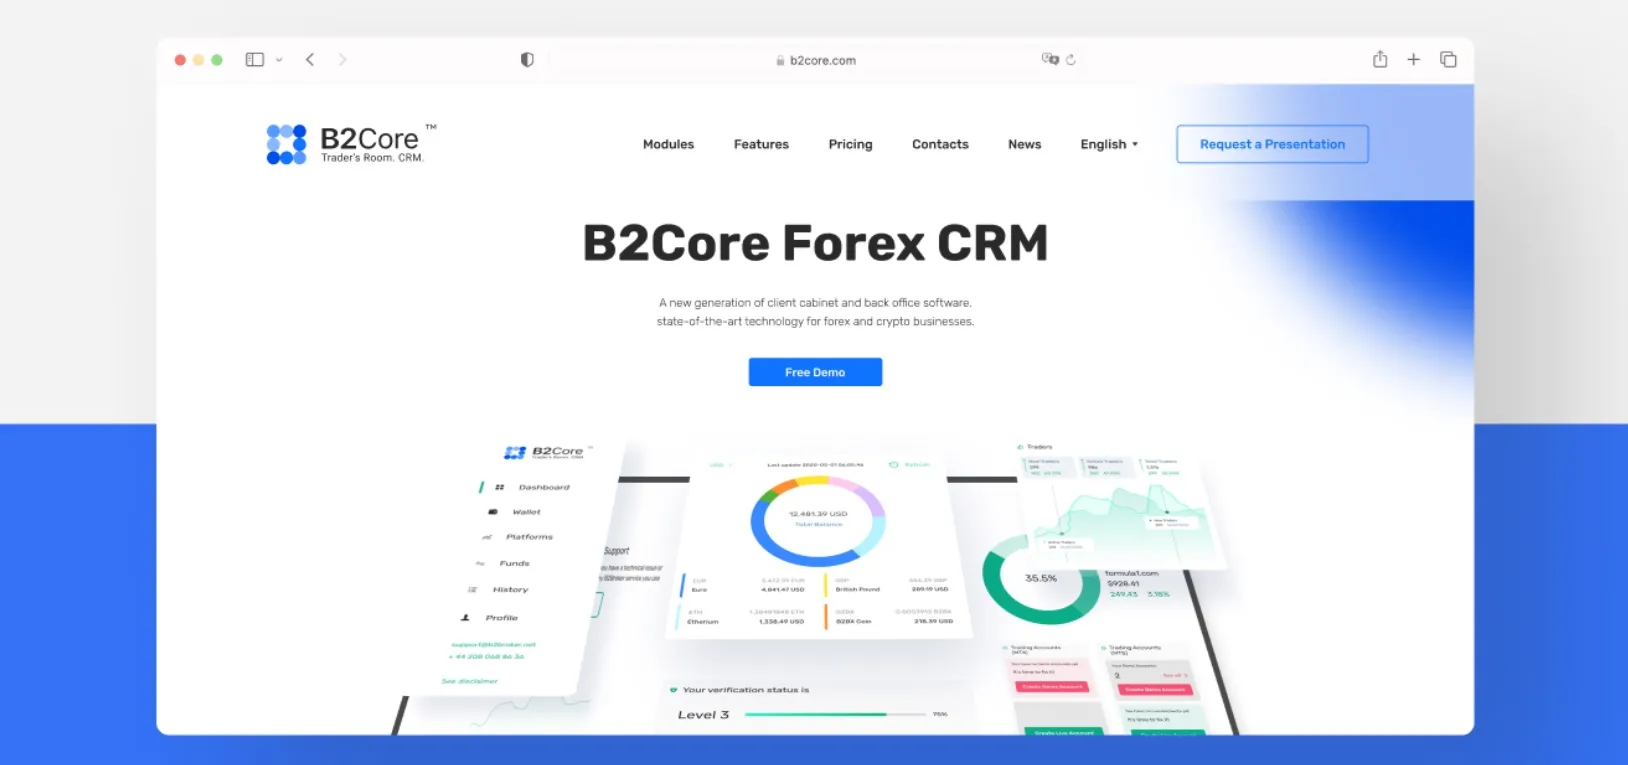 forex crm